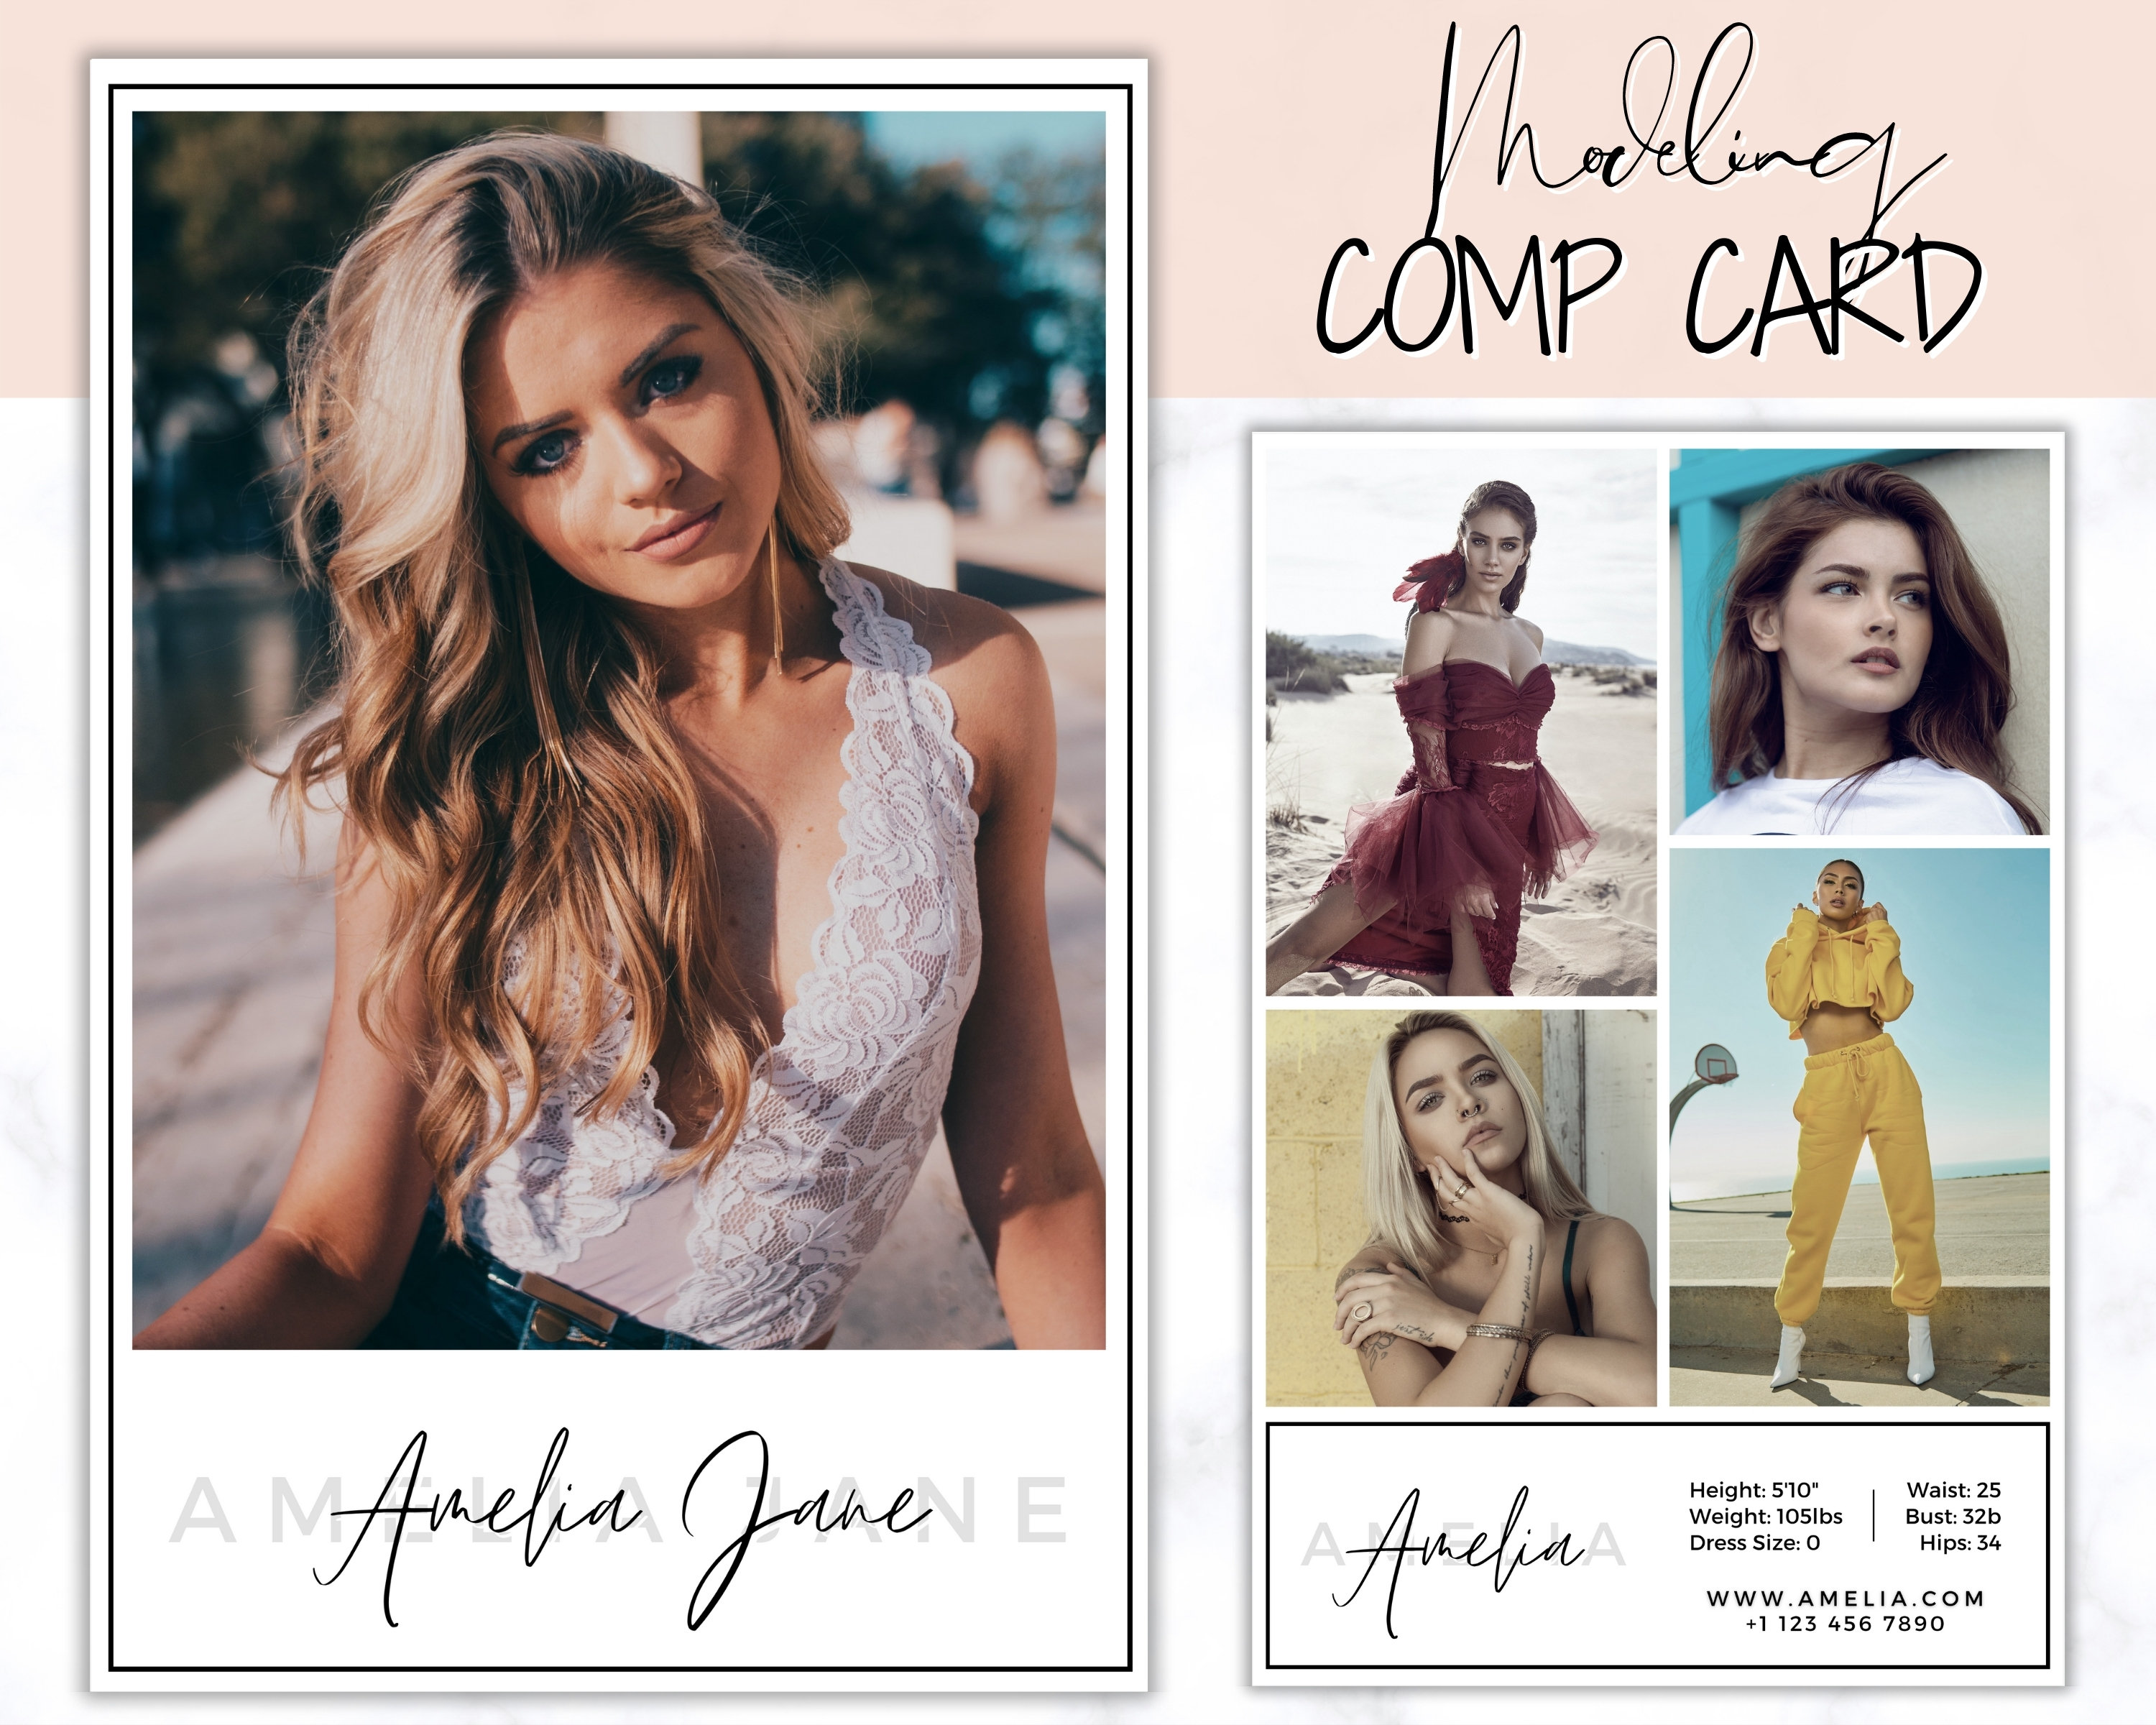 COMP CARD Template. Modeling Photocard! Zed Card for Models. Z Card.  Fashion Resume Photo Card. Modeling Compcard Editable Canva Template. Inside Free Zed Card Template